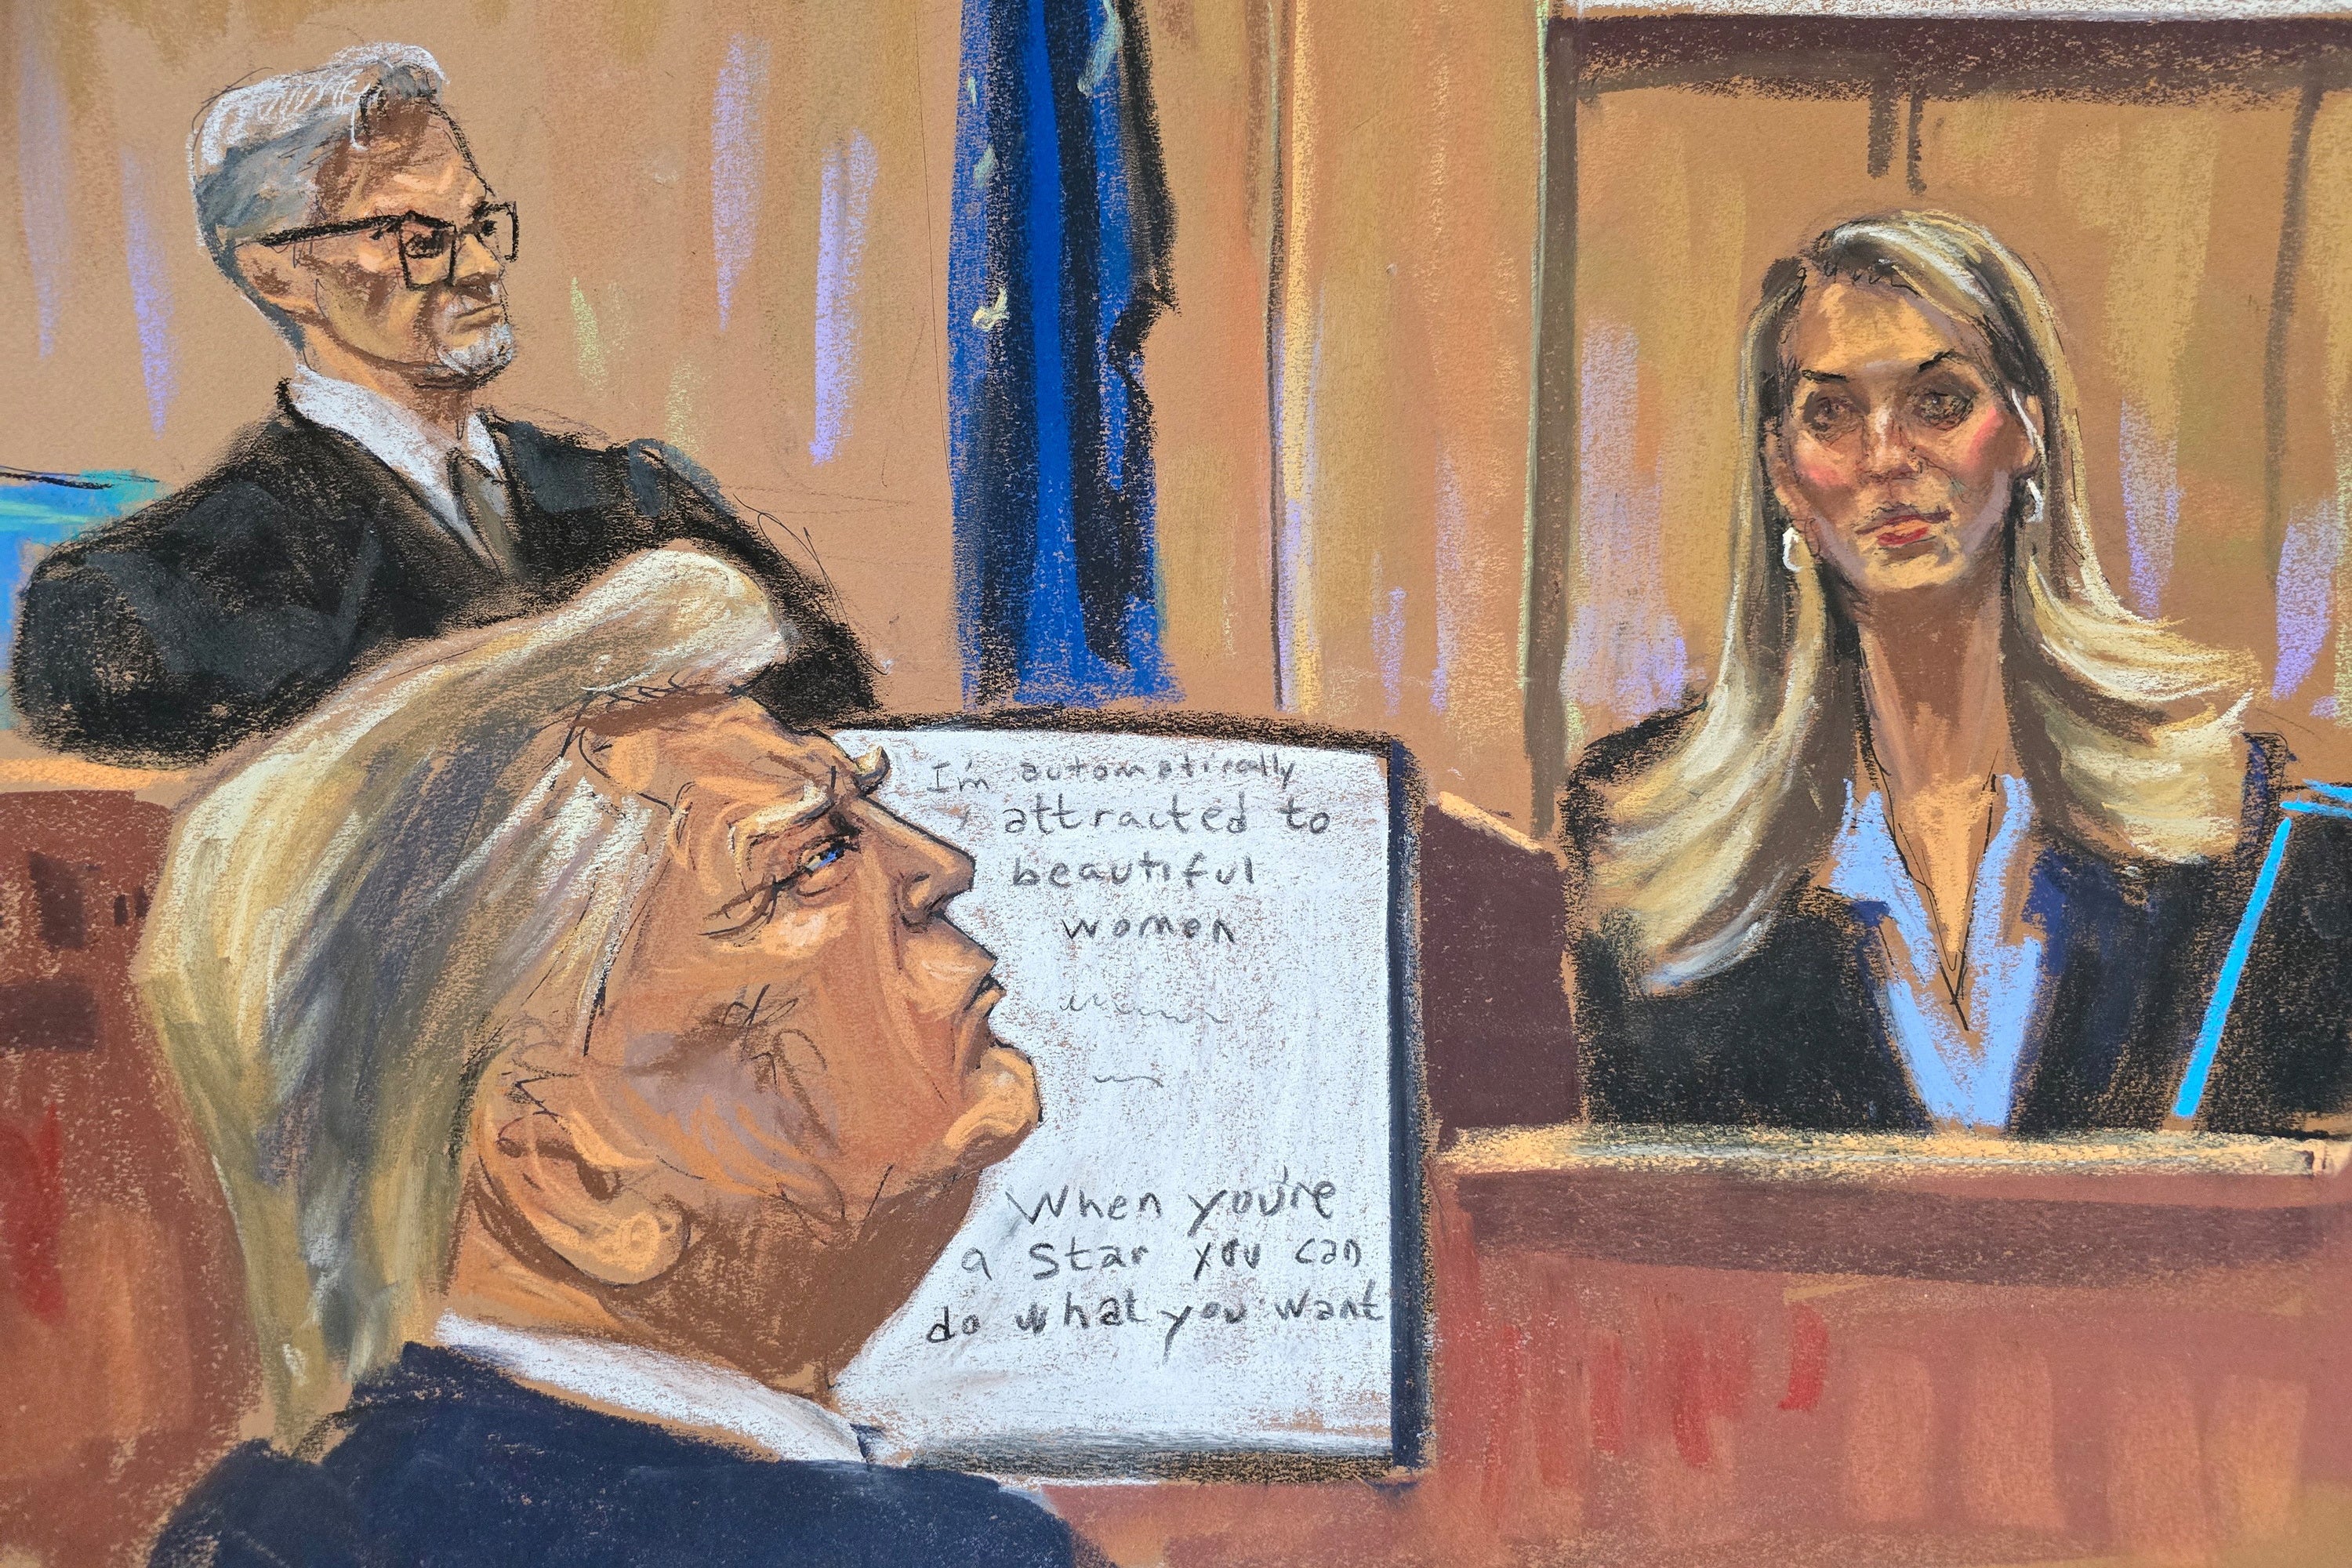 trump trial live: hope hicks gets emotional as she ends week’s testimony detailing access hollywood tape fallout